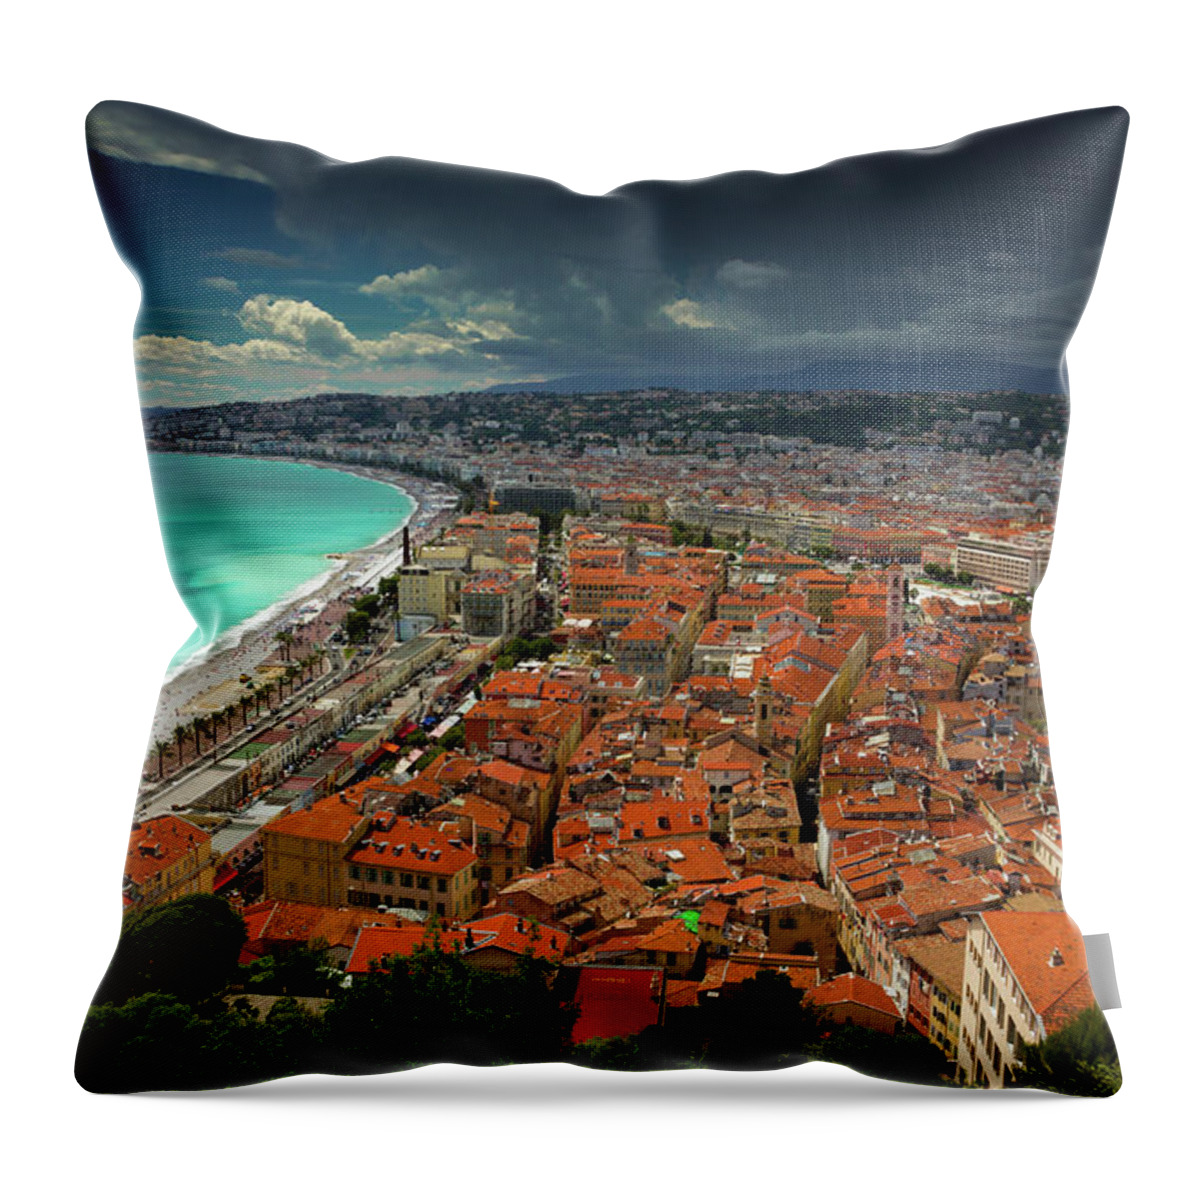 Tranquility Throw Pillow featuring the photograph Across The Rooftops by Andrew Turner